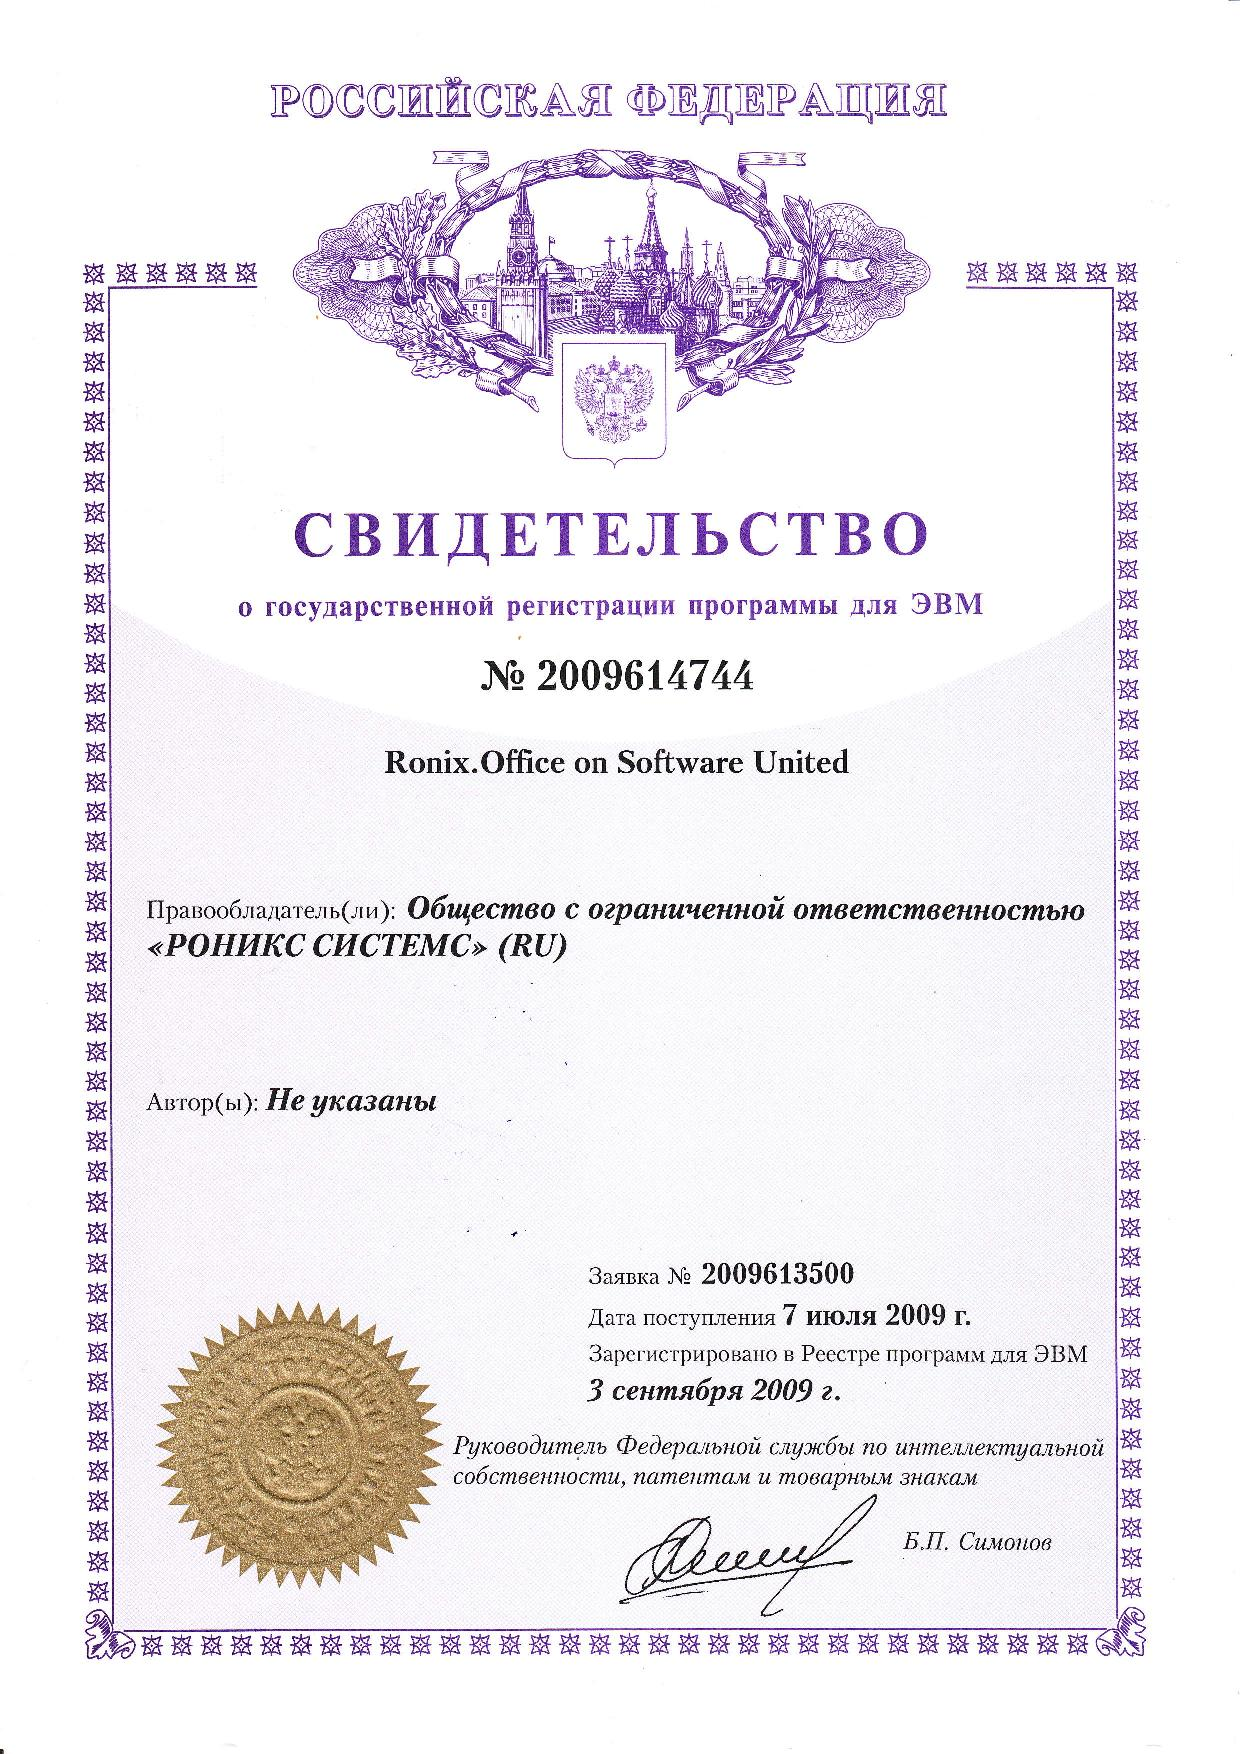 Ronix.Offiсe on Softwarе Unitеd — completed module document management system